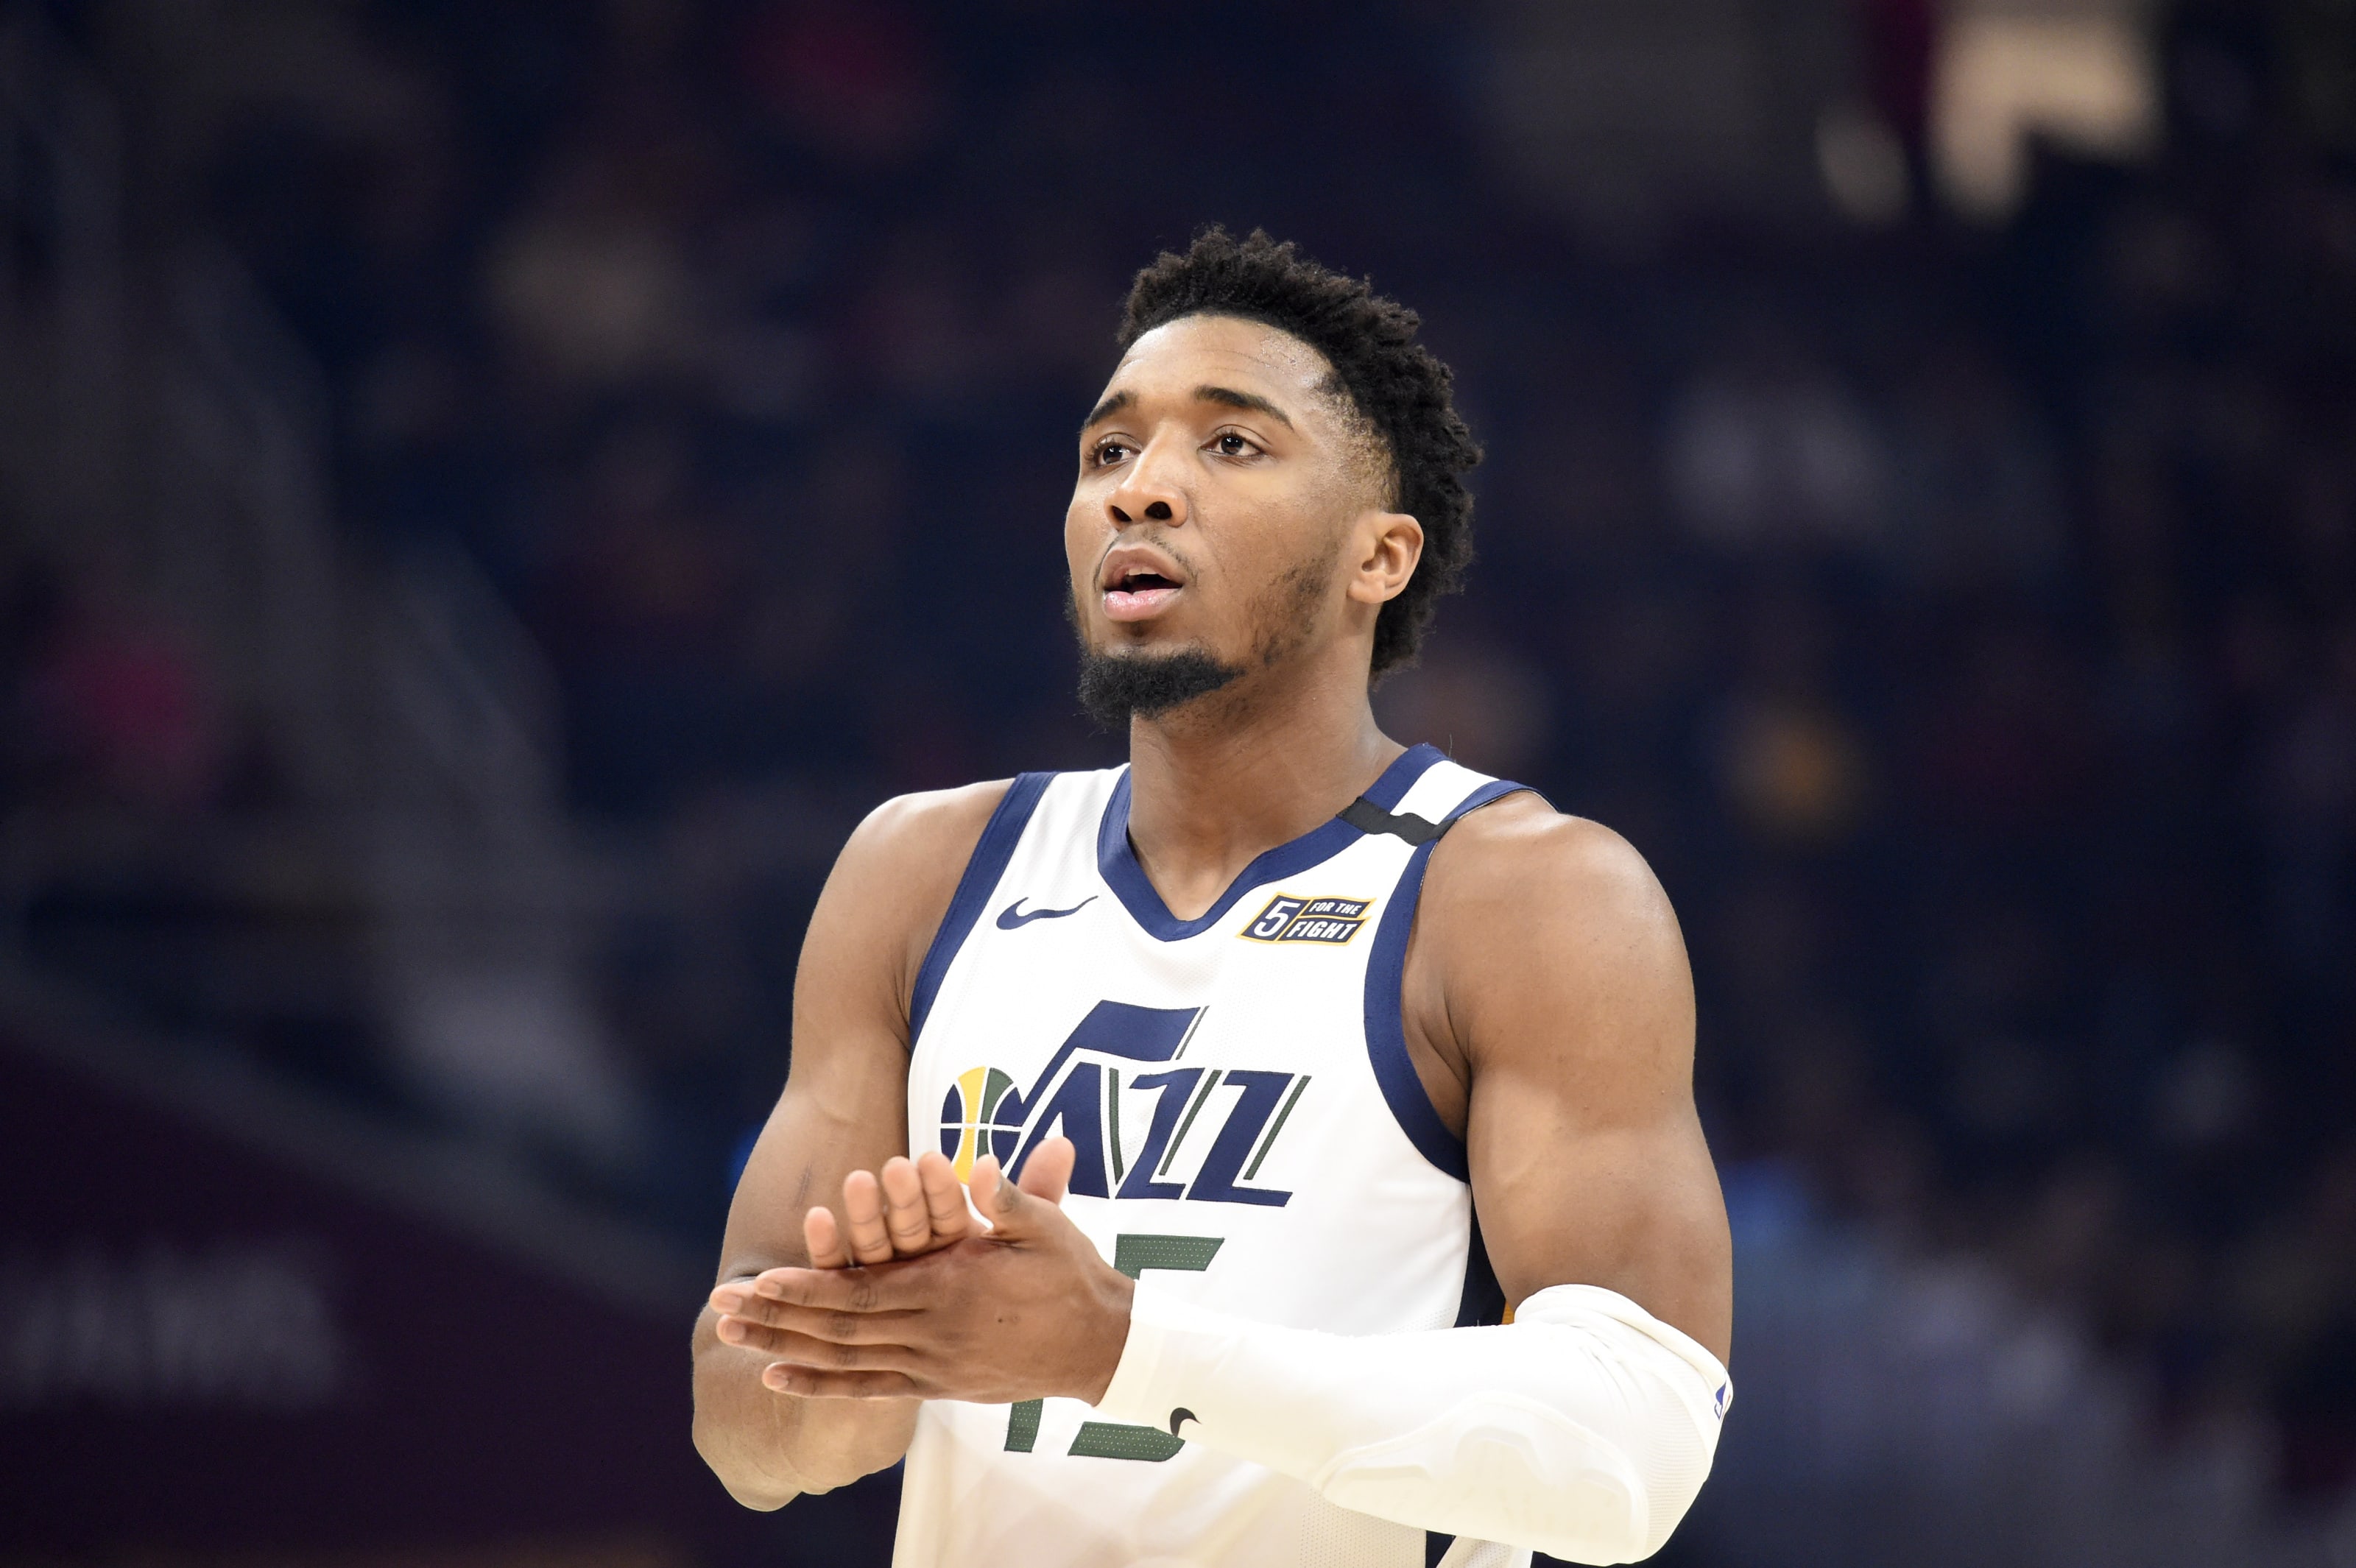 Here's a Donovan Mitchell jersey swap I made in the Cavs new